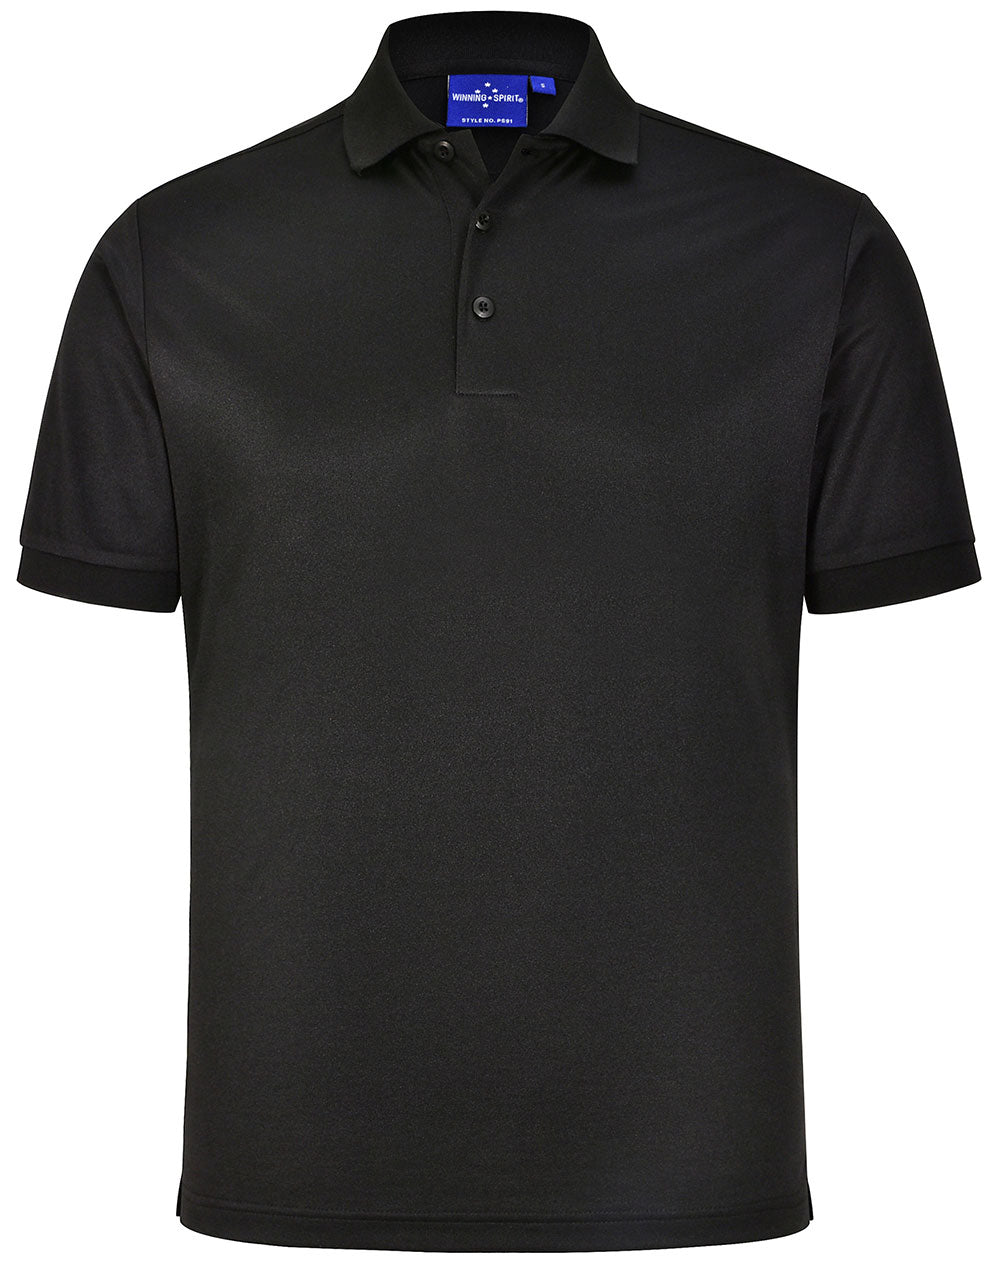 PS91 MENS SUSTAINABLE POLY/COTTON CORPORATE SS POLO